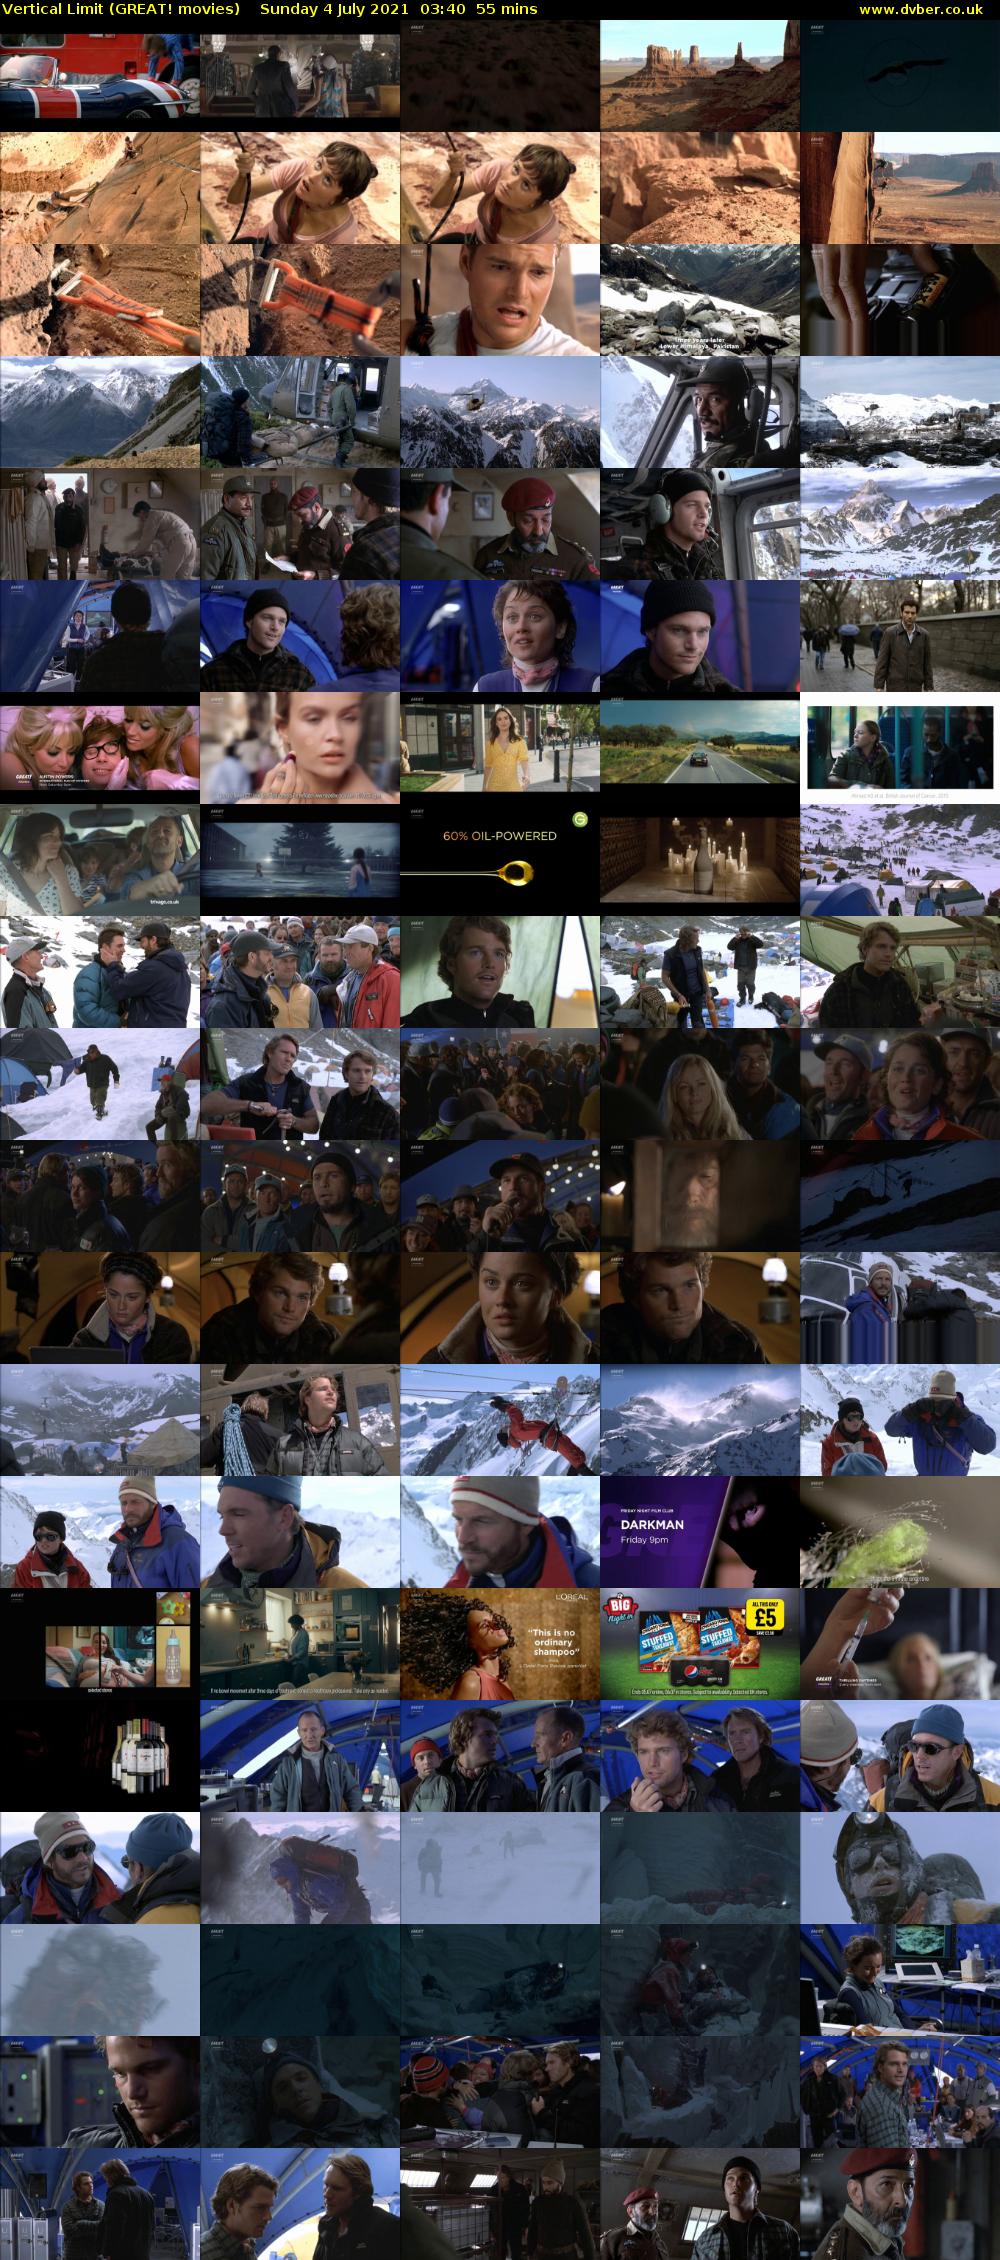 Vertical Limit (GREAT! movies) Sunday 4 July 2021 03:40 - 04:35